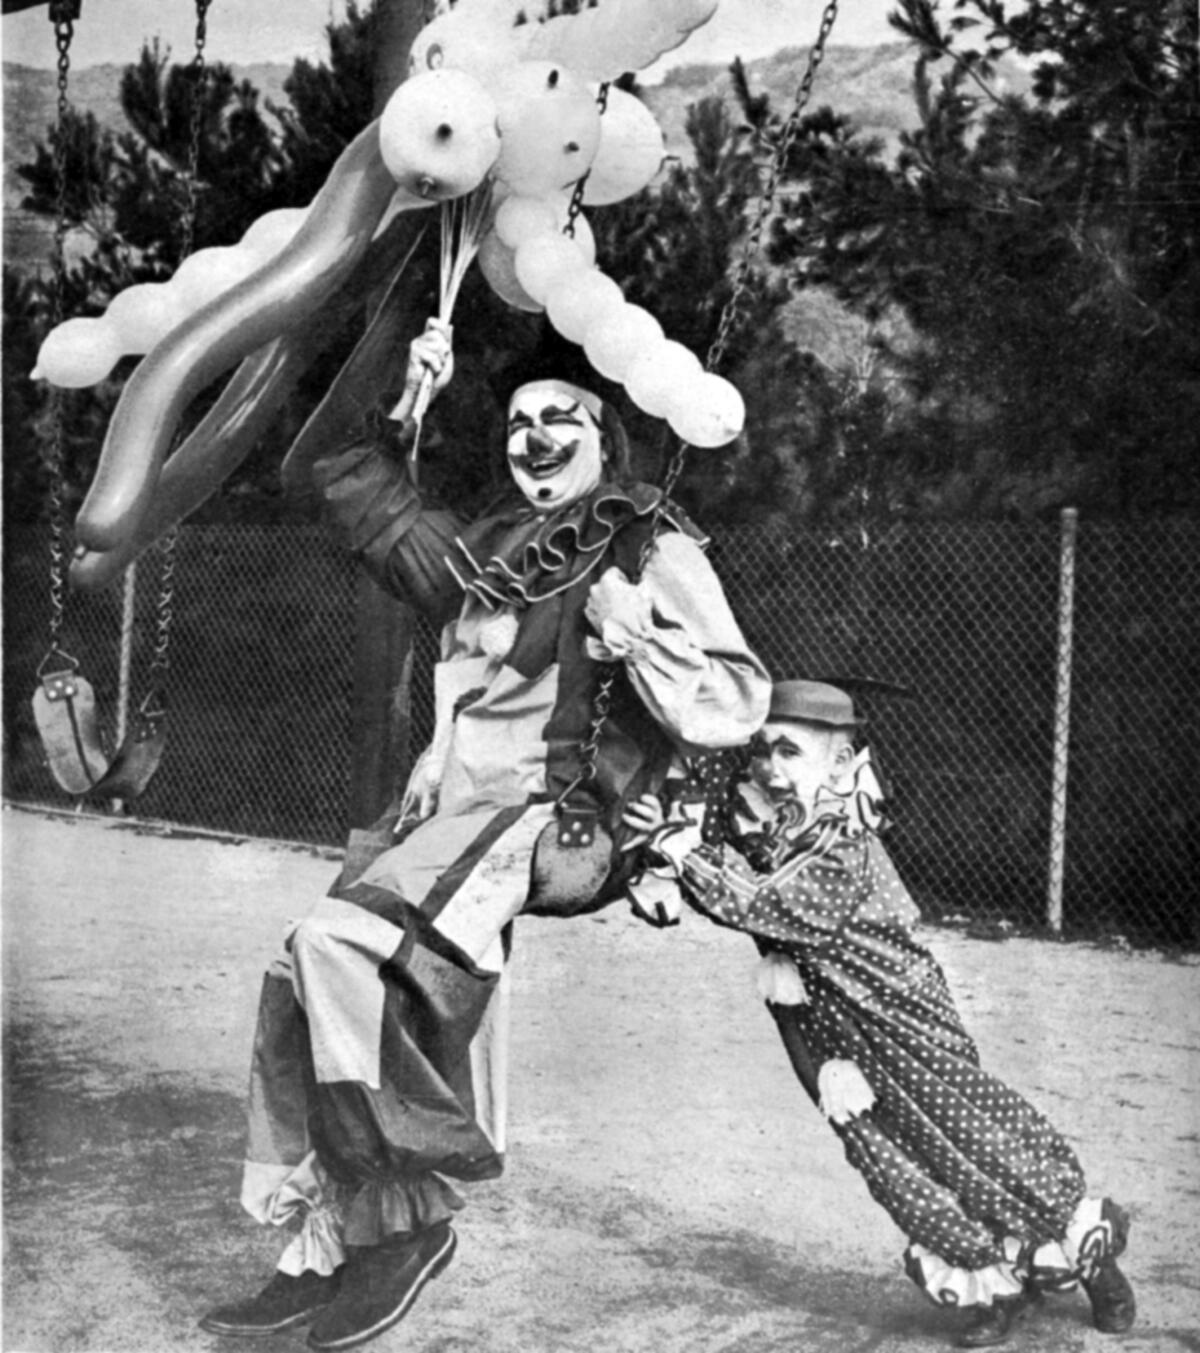 Leon Forsyth and his son Randy, a second-grade student at Paradise Canyon Elementary, dressed as clowns to help publicize in a Valley Sun cover photo the school PTA's Mardis Gras Carnival, held Feb. 27, 1960.